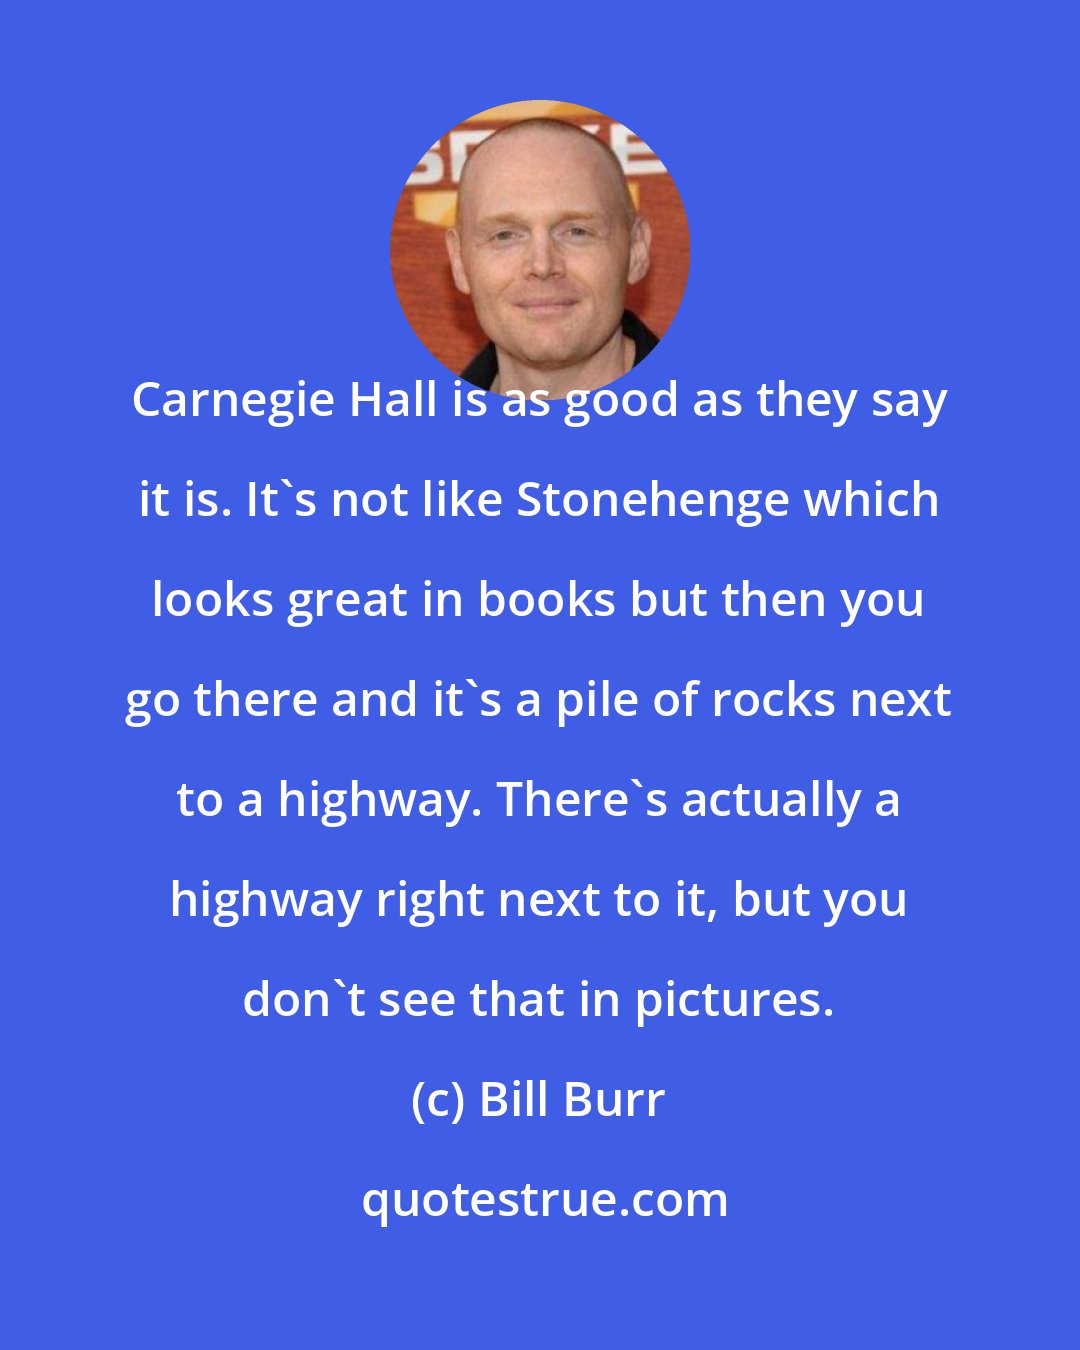 Bill Burr: Carnegie Hall is as good as they say it is. It's not like Stonehenge which looks great in books but then you go there and it's a pile of rocks next to a highway. There's actually a highway right next to it, but you don't see that in pictures.